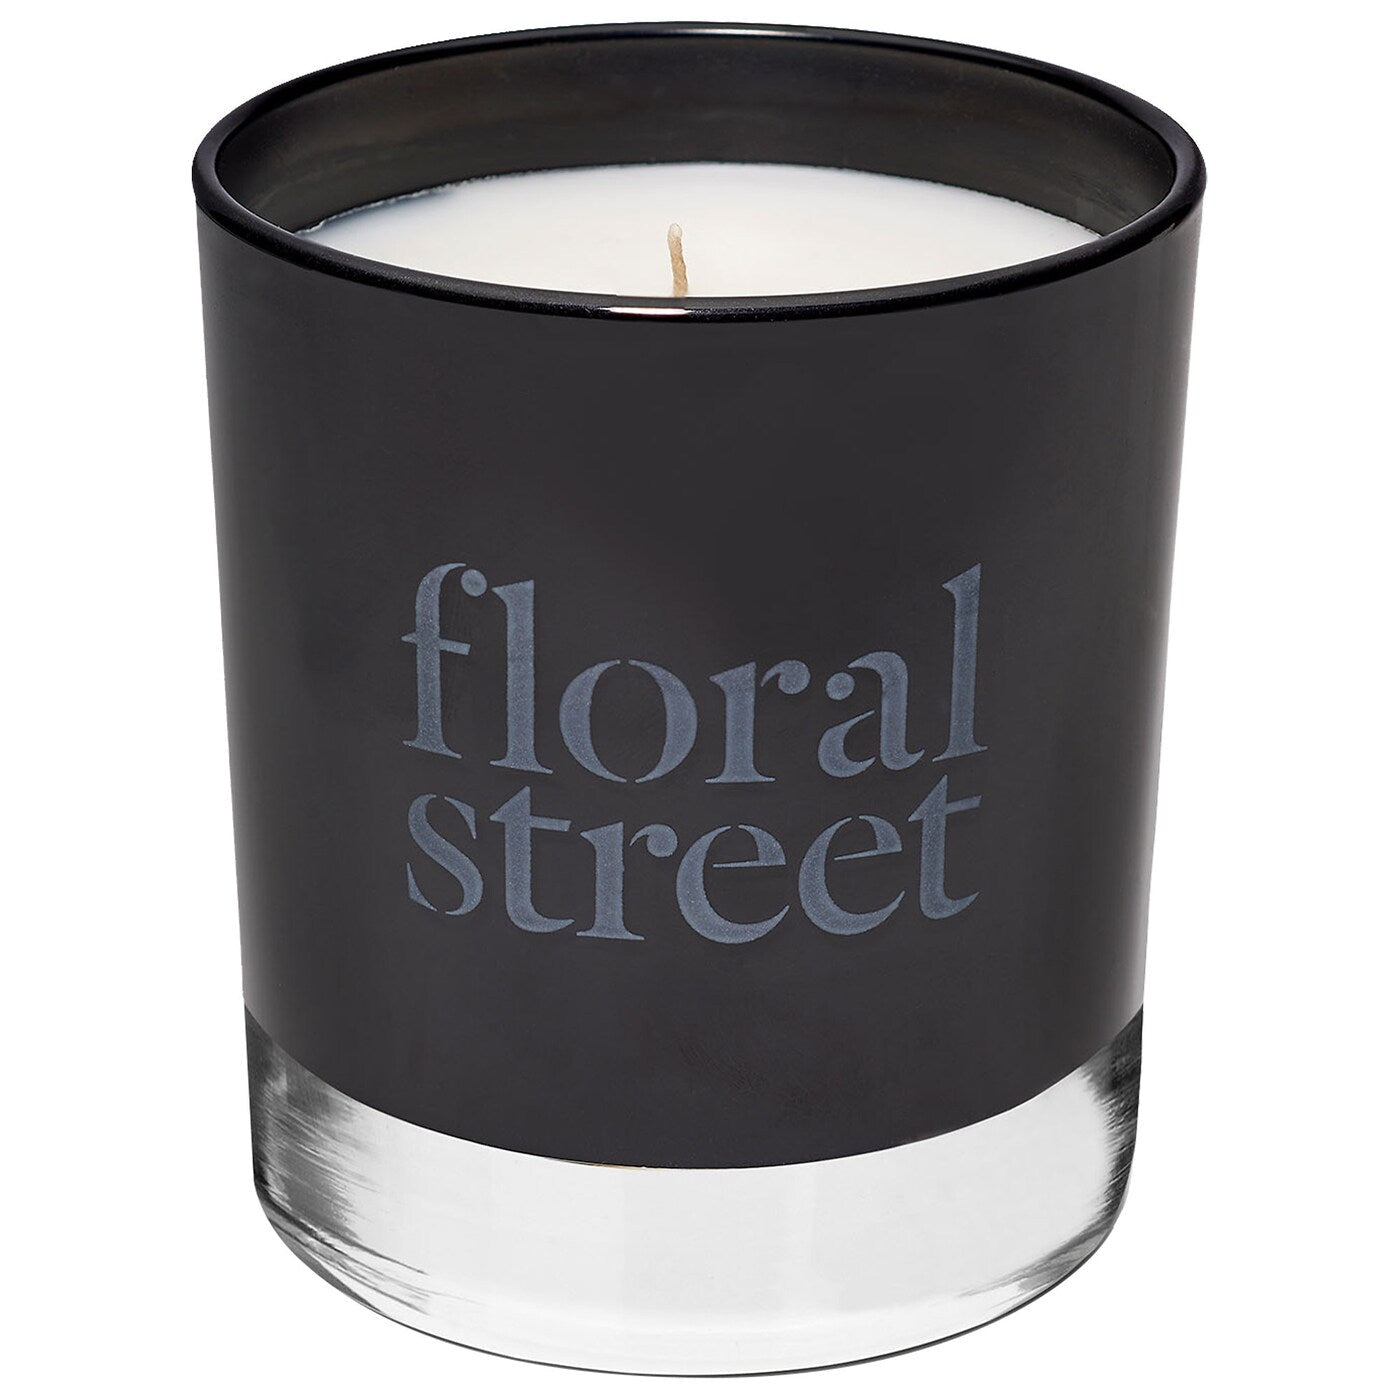 Floral Street Scented Candle - Fireplace